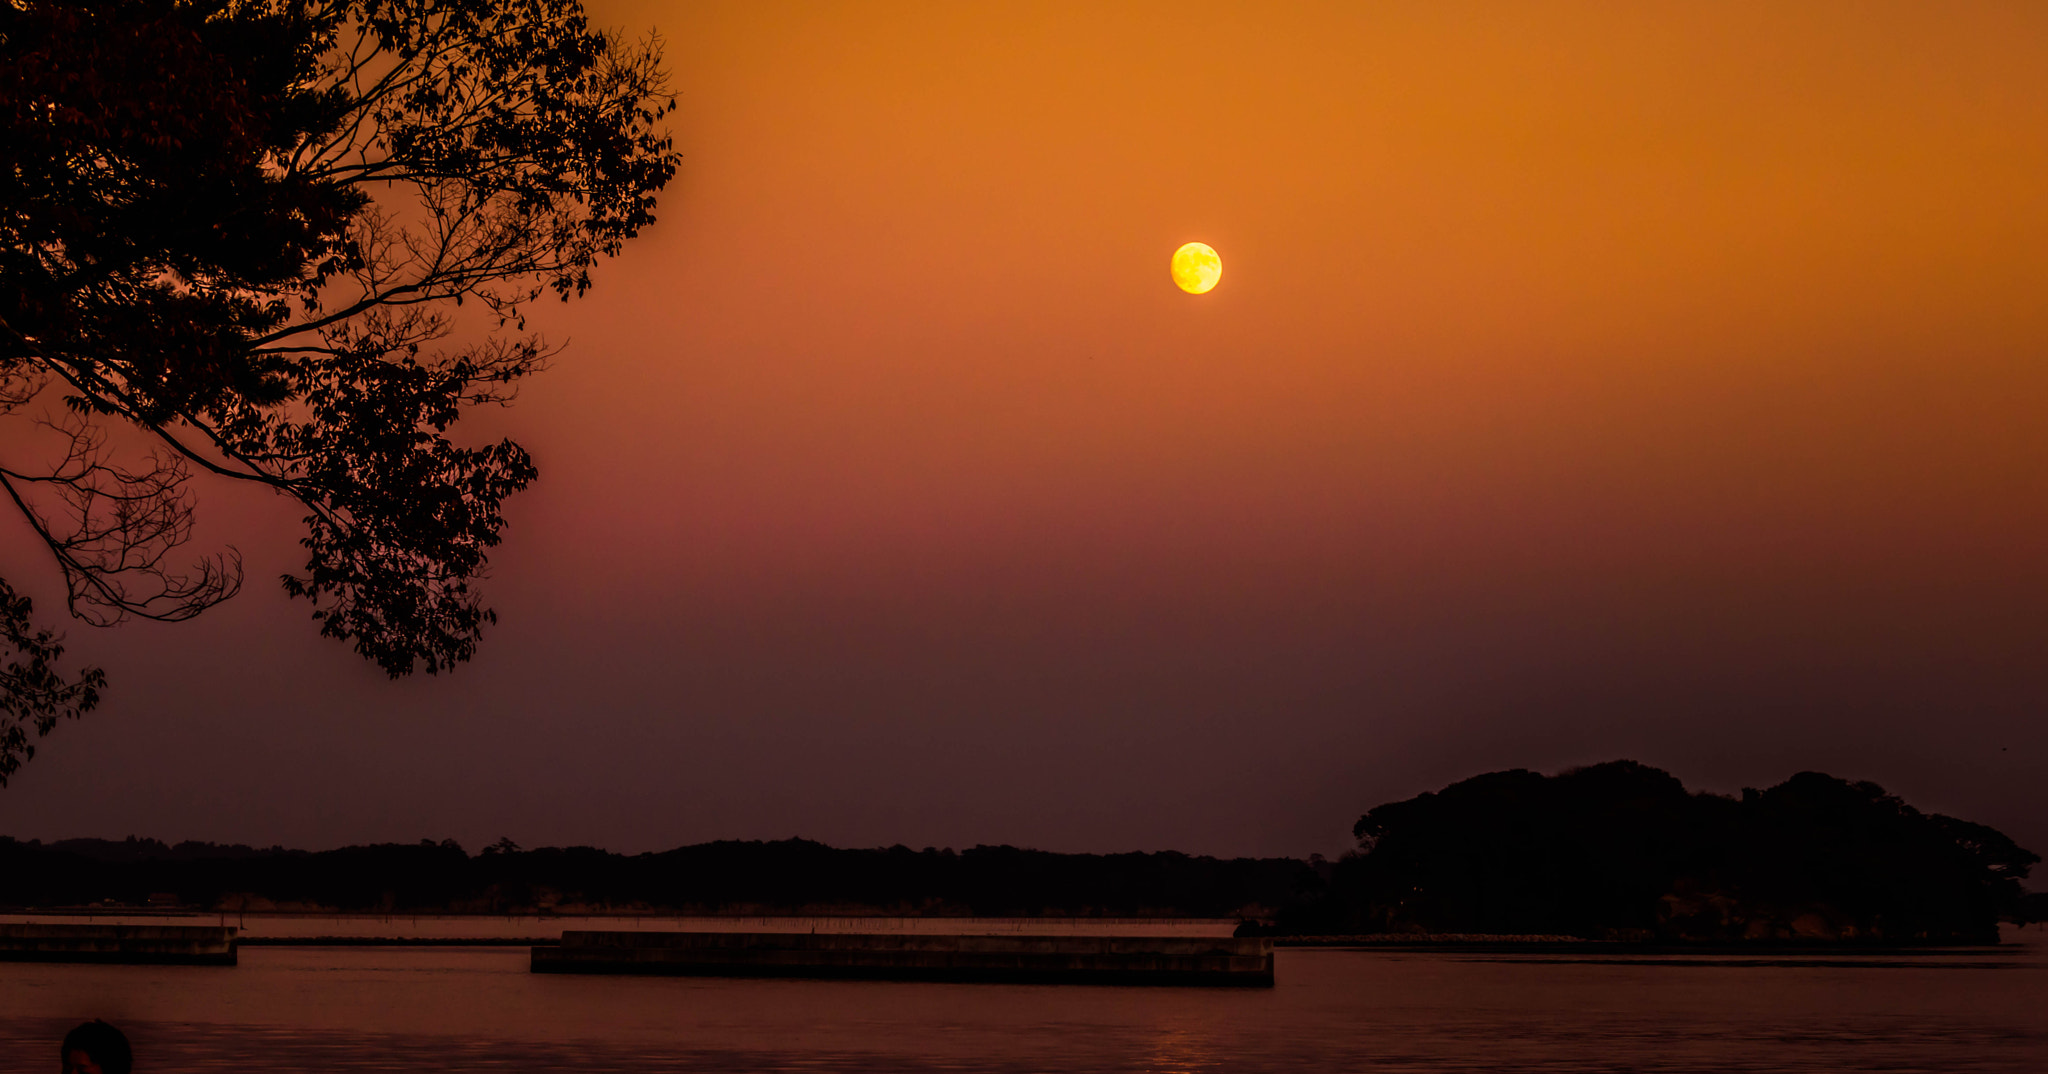 Nikon D5500 + Nikon AF-S DX Nikkor 55-200mm F4-5.6G VR sample photo. This photo i clicked at matsushima, amazingly beautiful place. it was the night of supermoon! photography